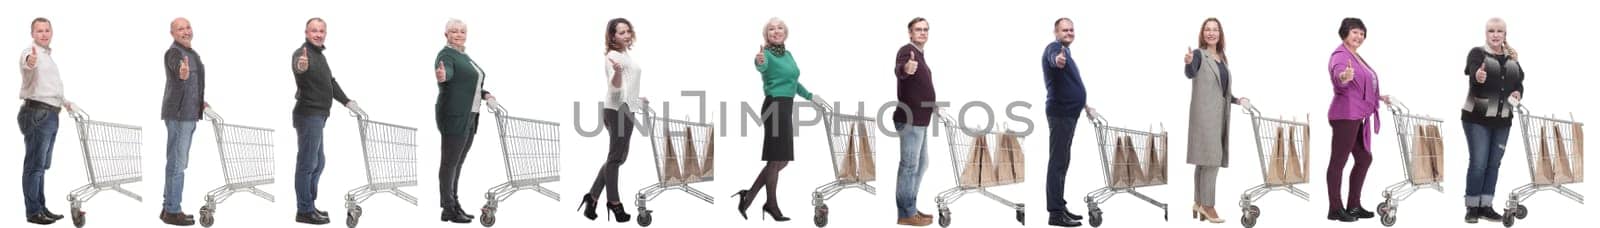 a group of people in profile with a basket showing thumbs up on a white background